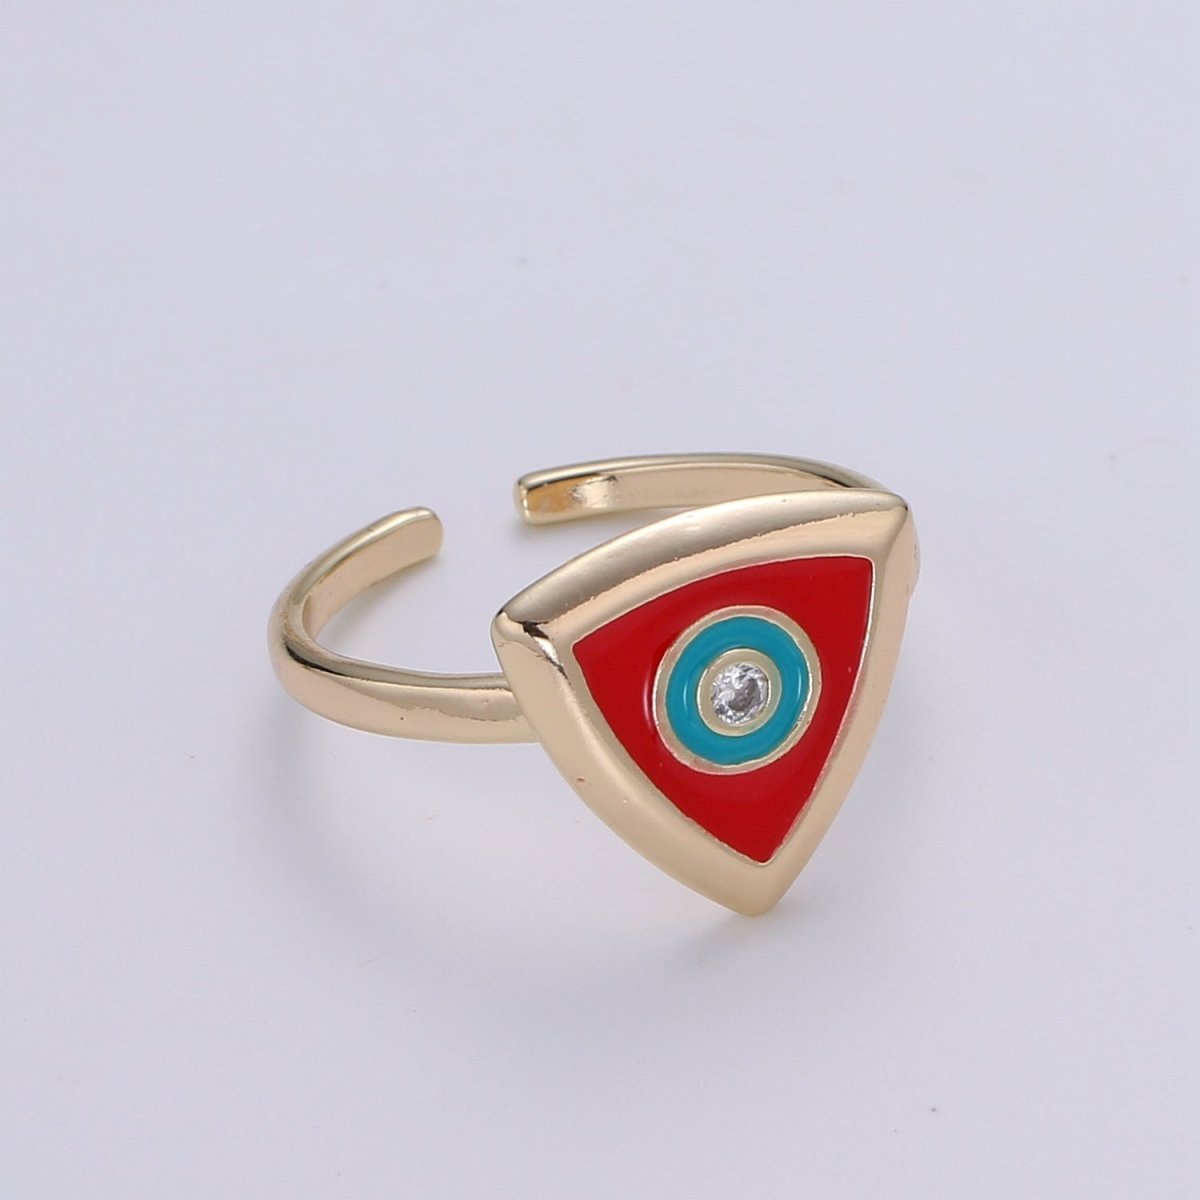 1x Evil Eye Ring ,Gold Open Adjustable Ring Minimalist Jewelry Enamel Triangle Ring Everyday Wear White Black Red O-334 ~ O-336 - DLUXCA